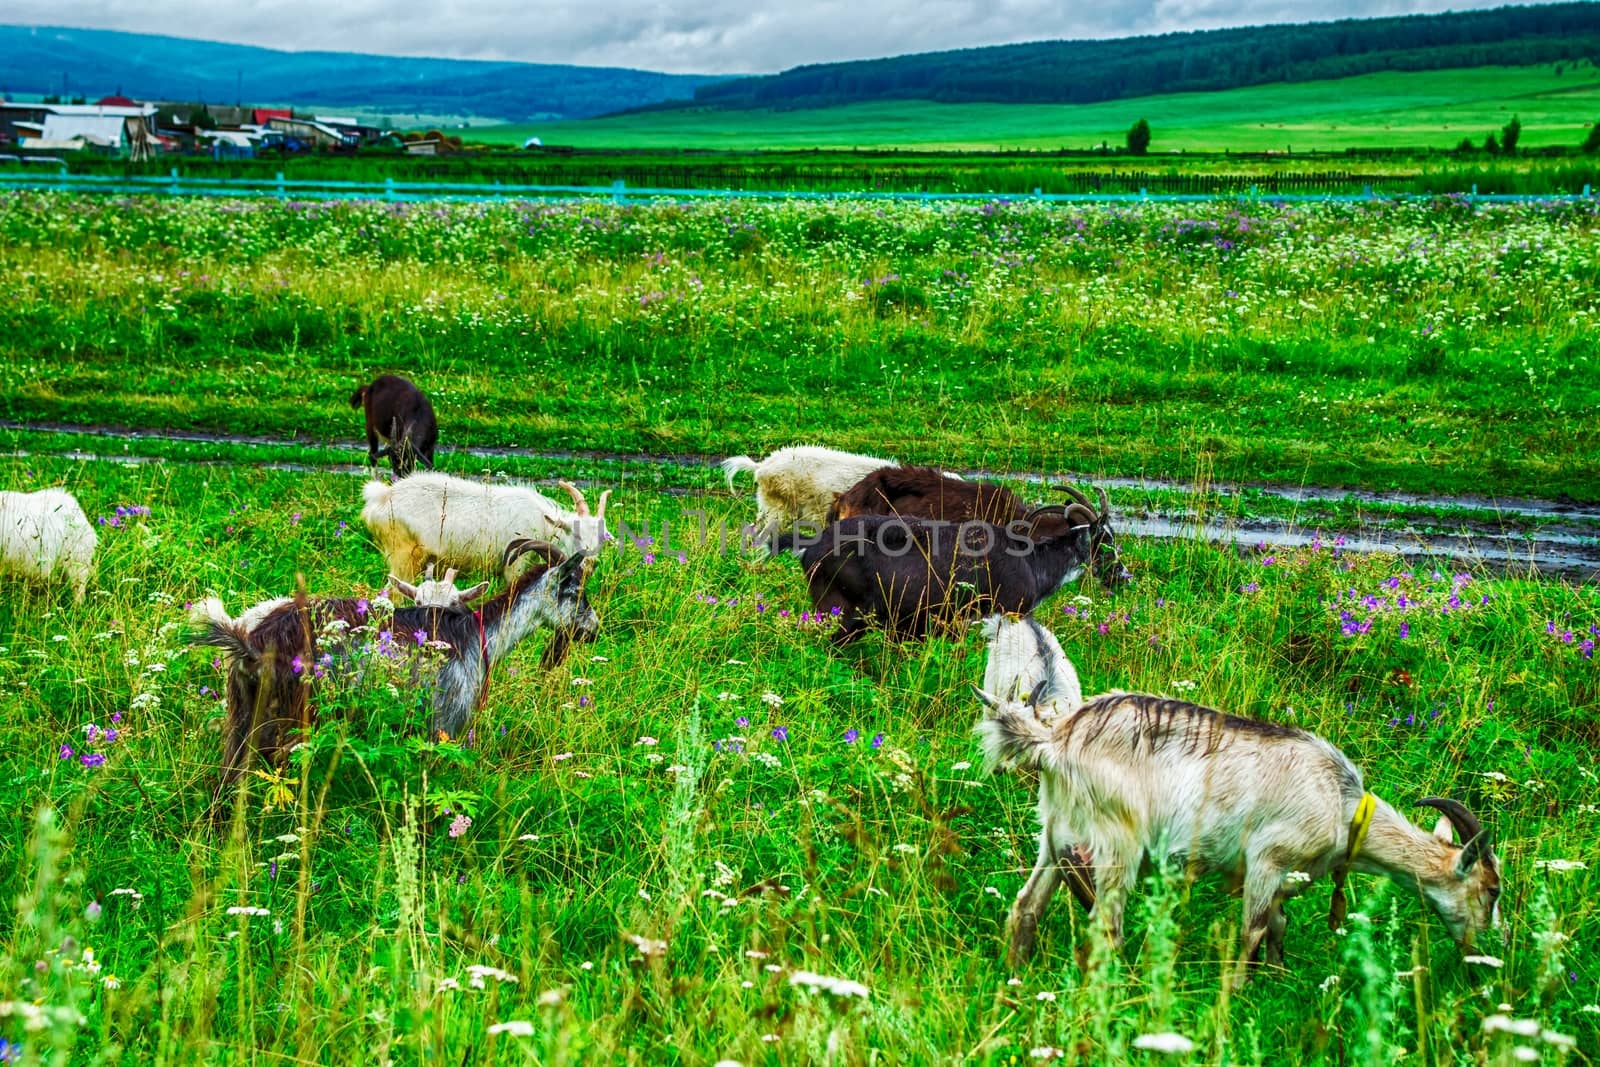 goats grazing in a field with goats in the mountains of green grass